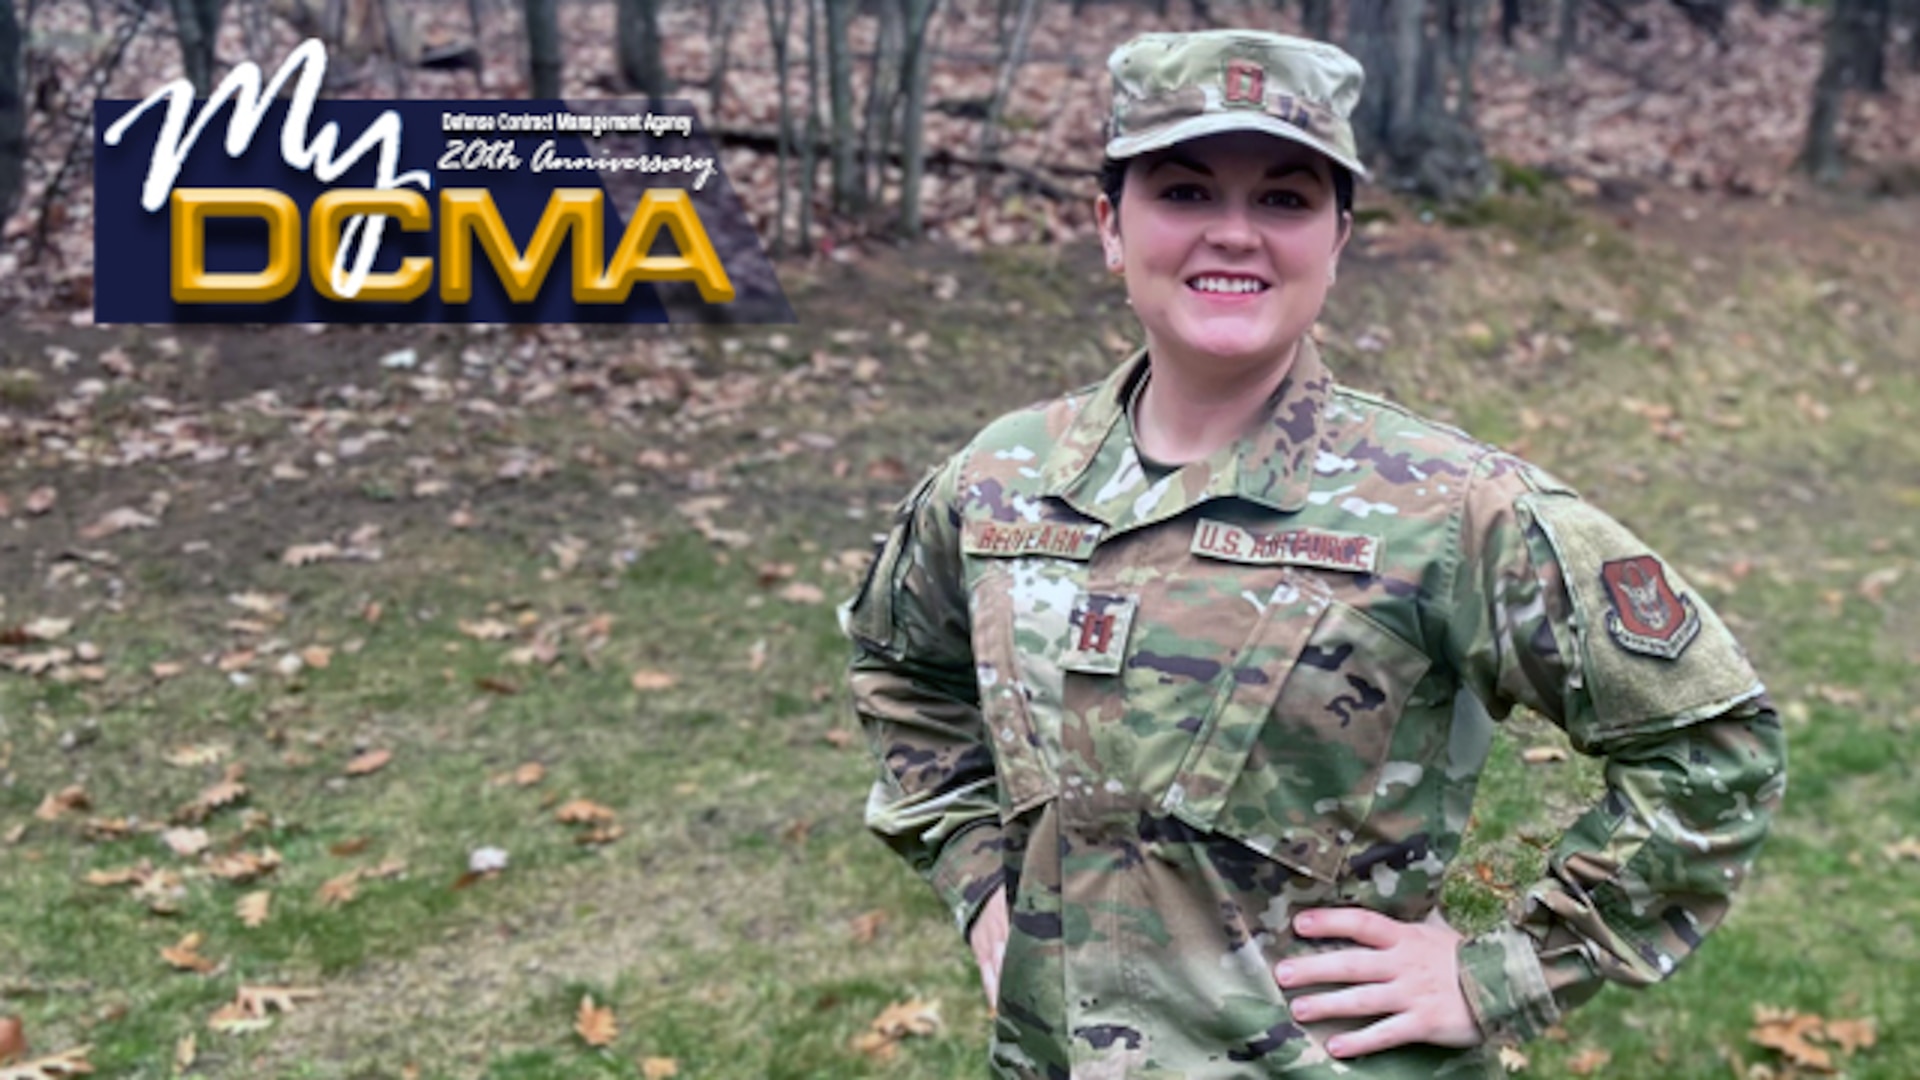 Female Air Force officer wears her military uniform and cover while standing outside